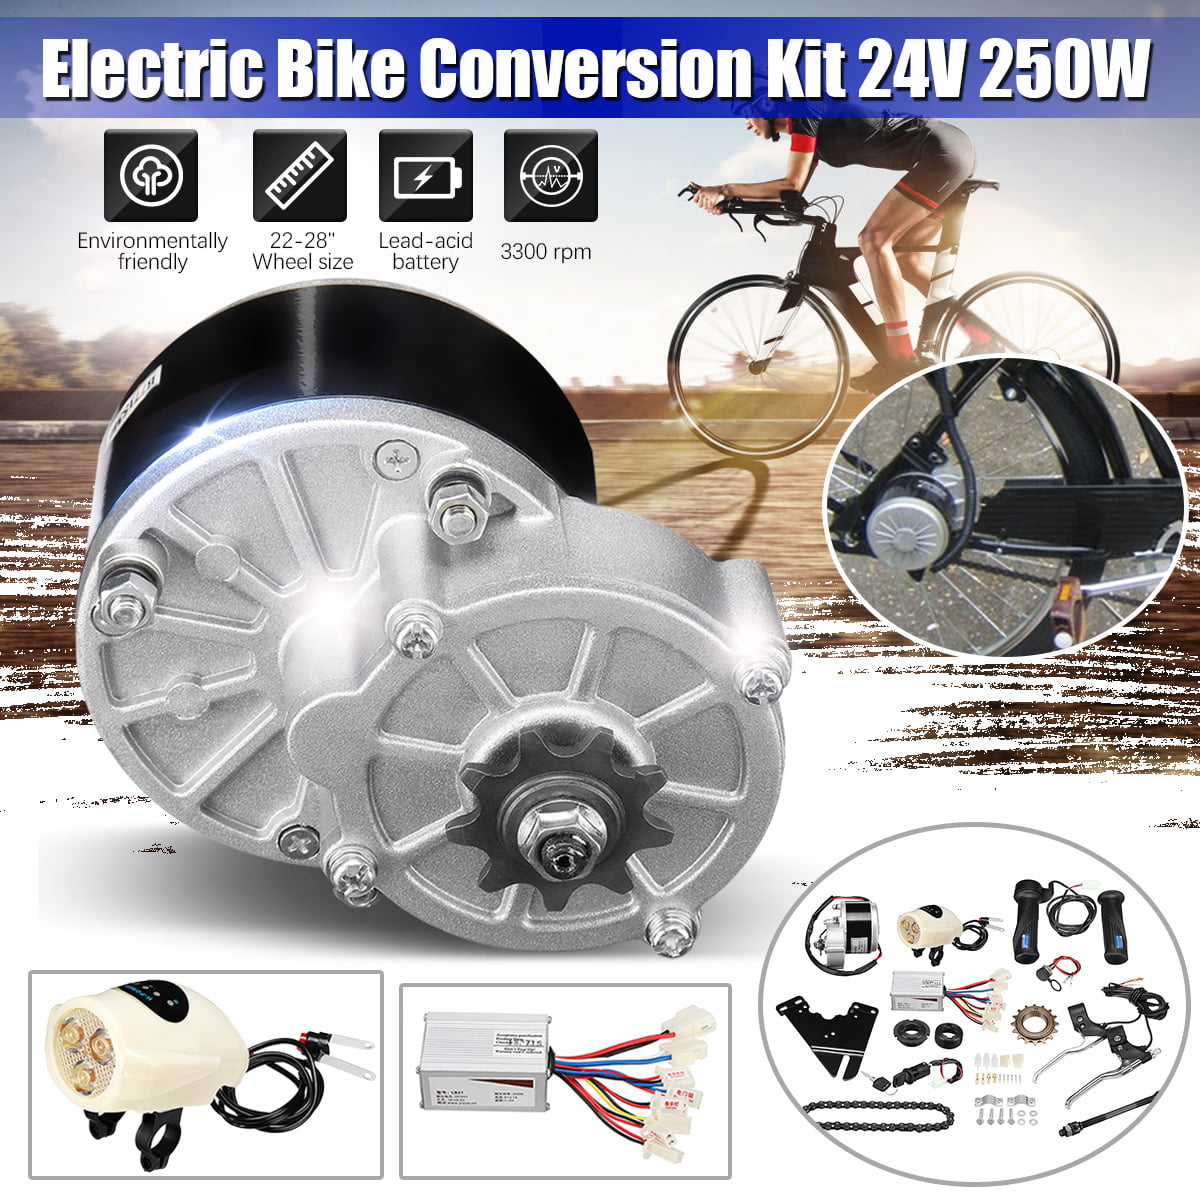 Dc 24V 250W Electric Bicklcle Motor Conversion Kit for 20"-28" Electric Bike,USA 